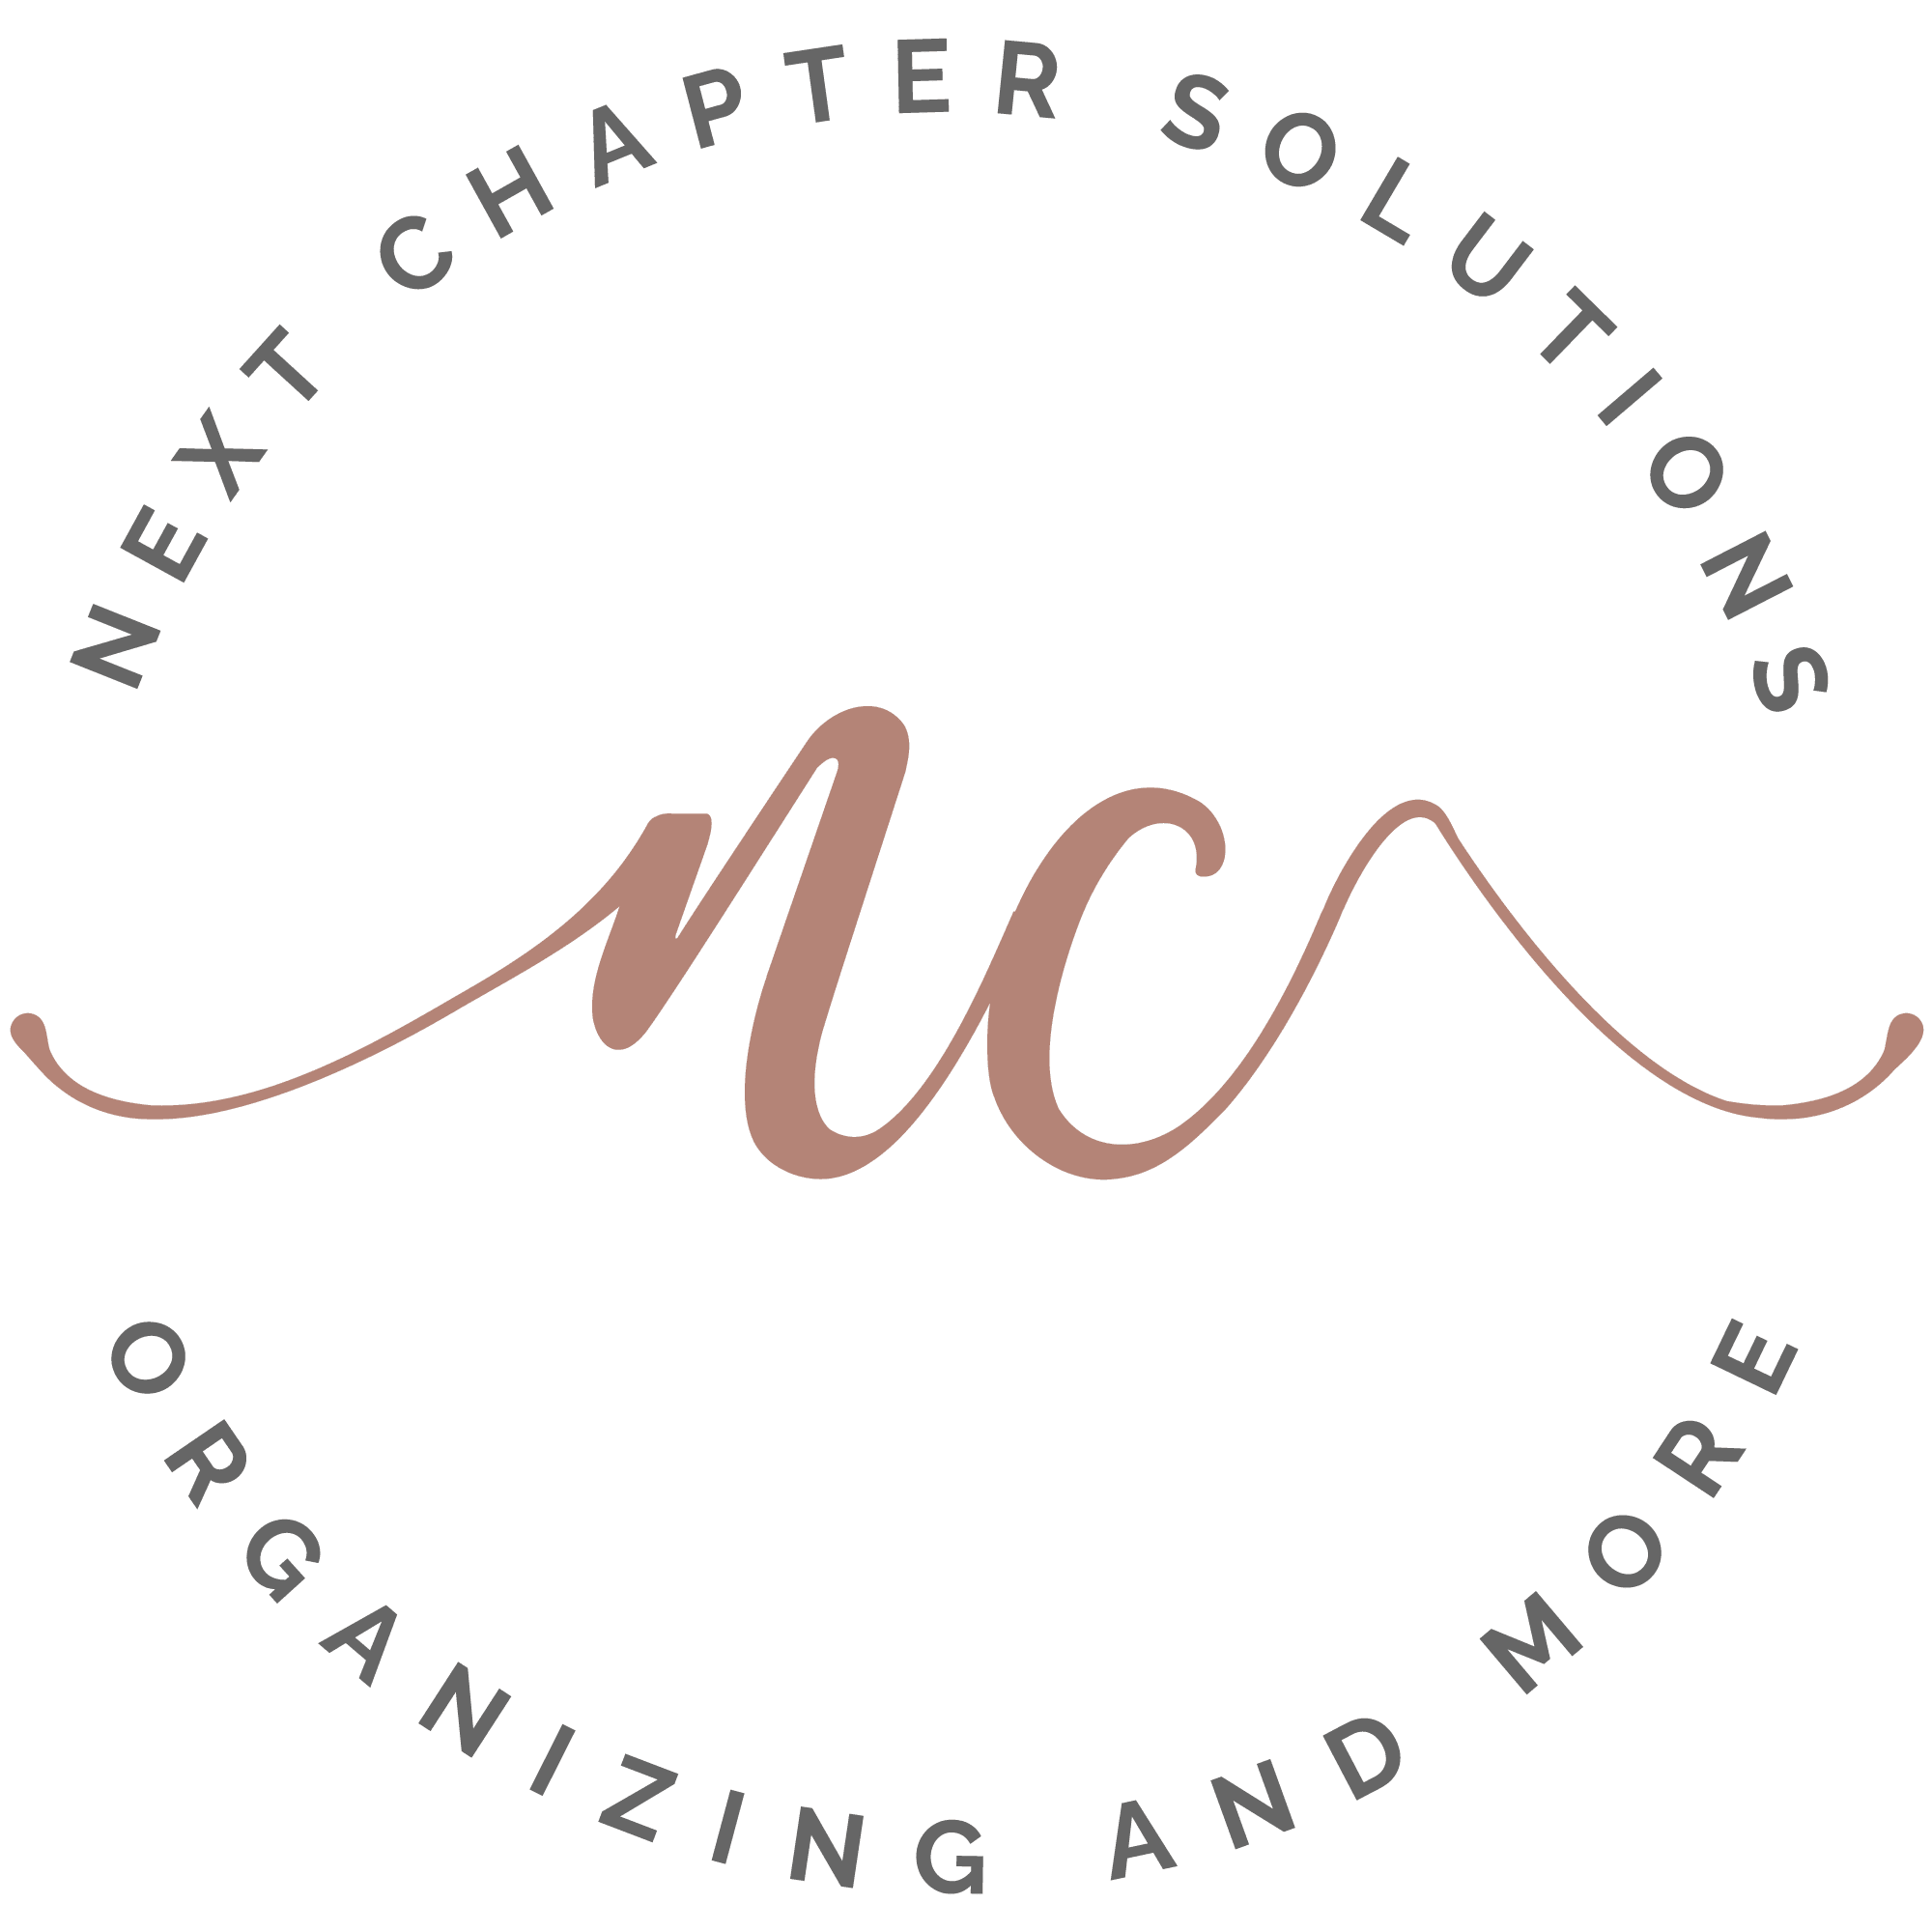 Next Chapter Solutions - Home Organizing Services